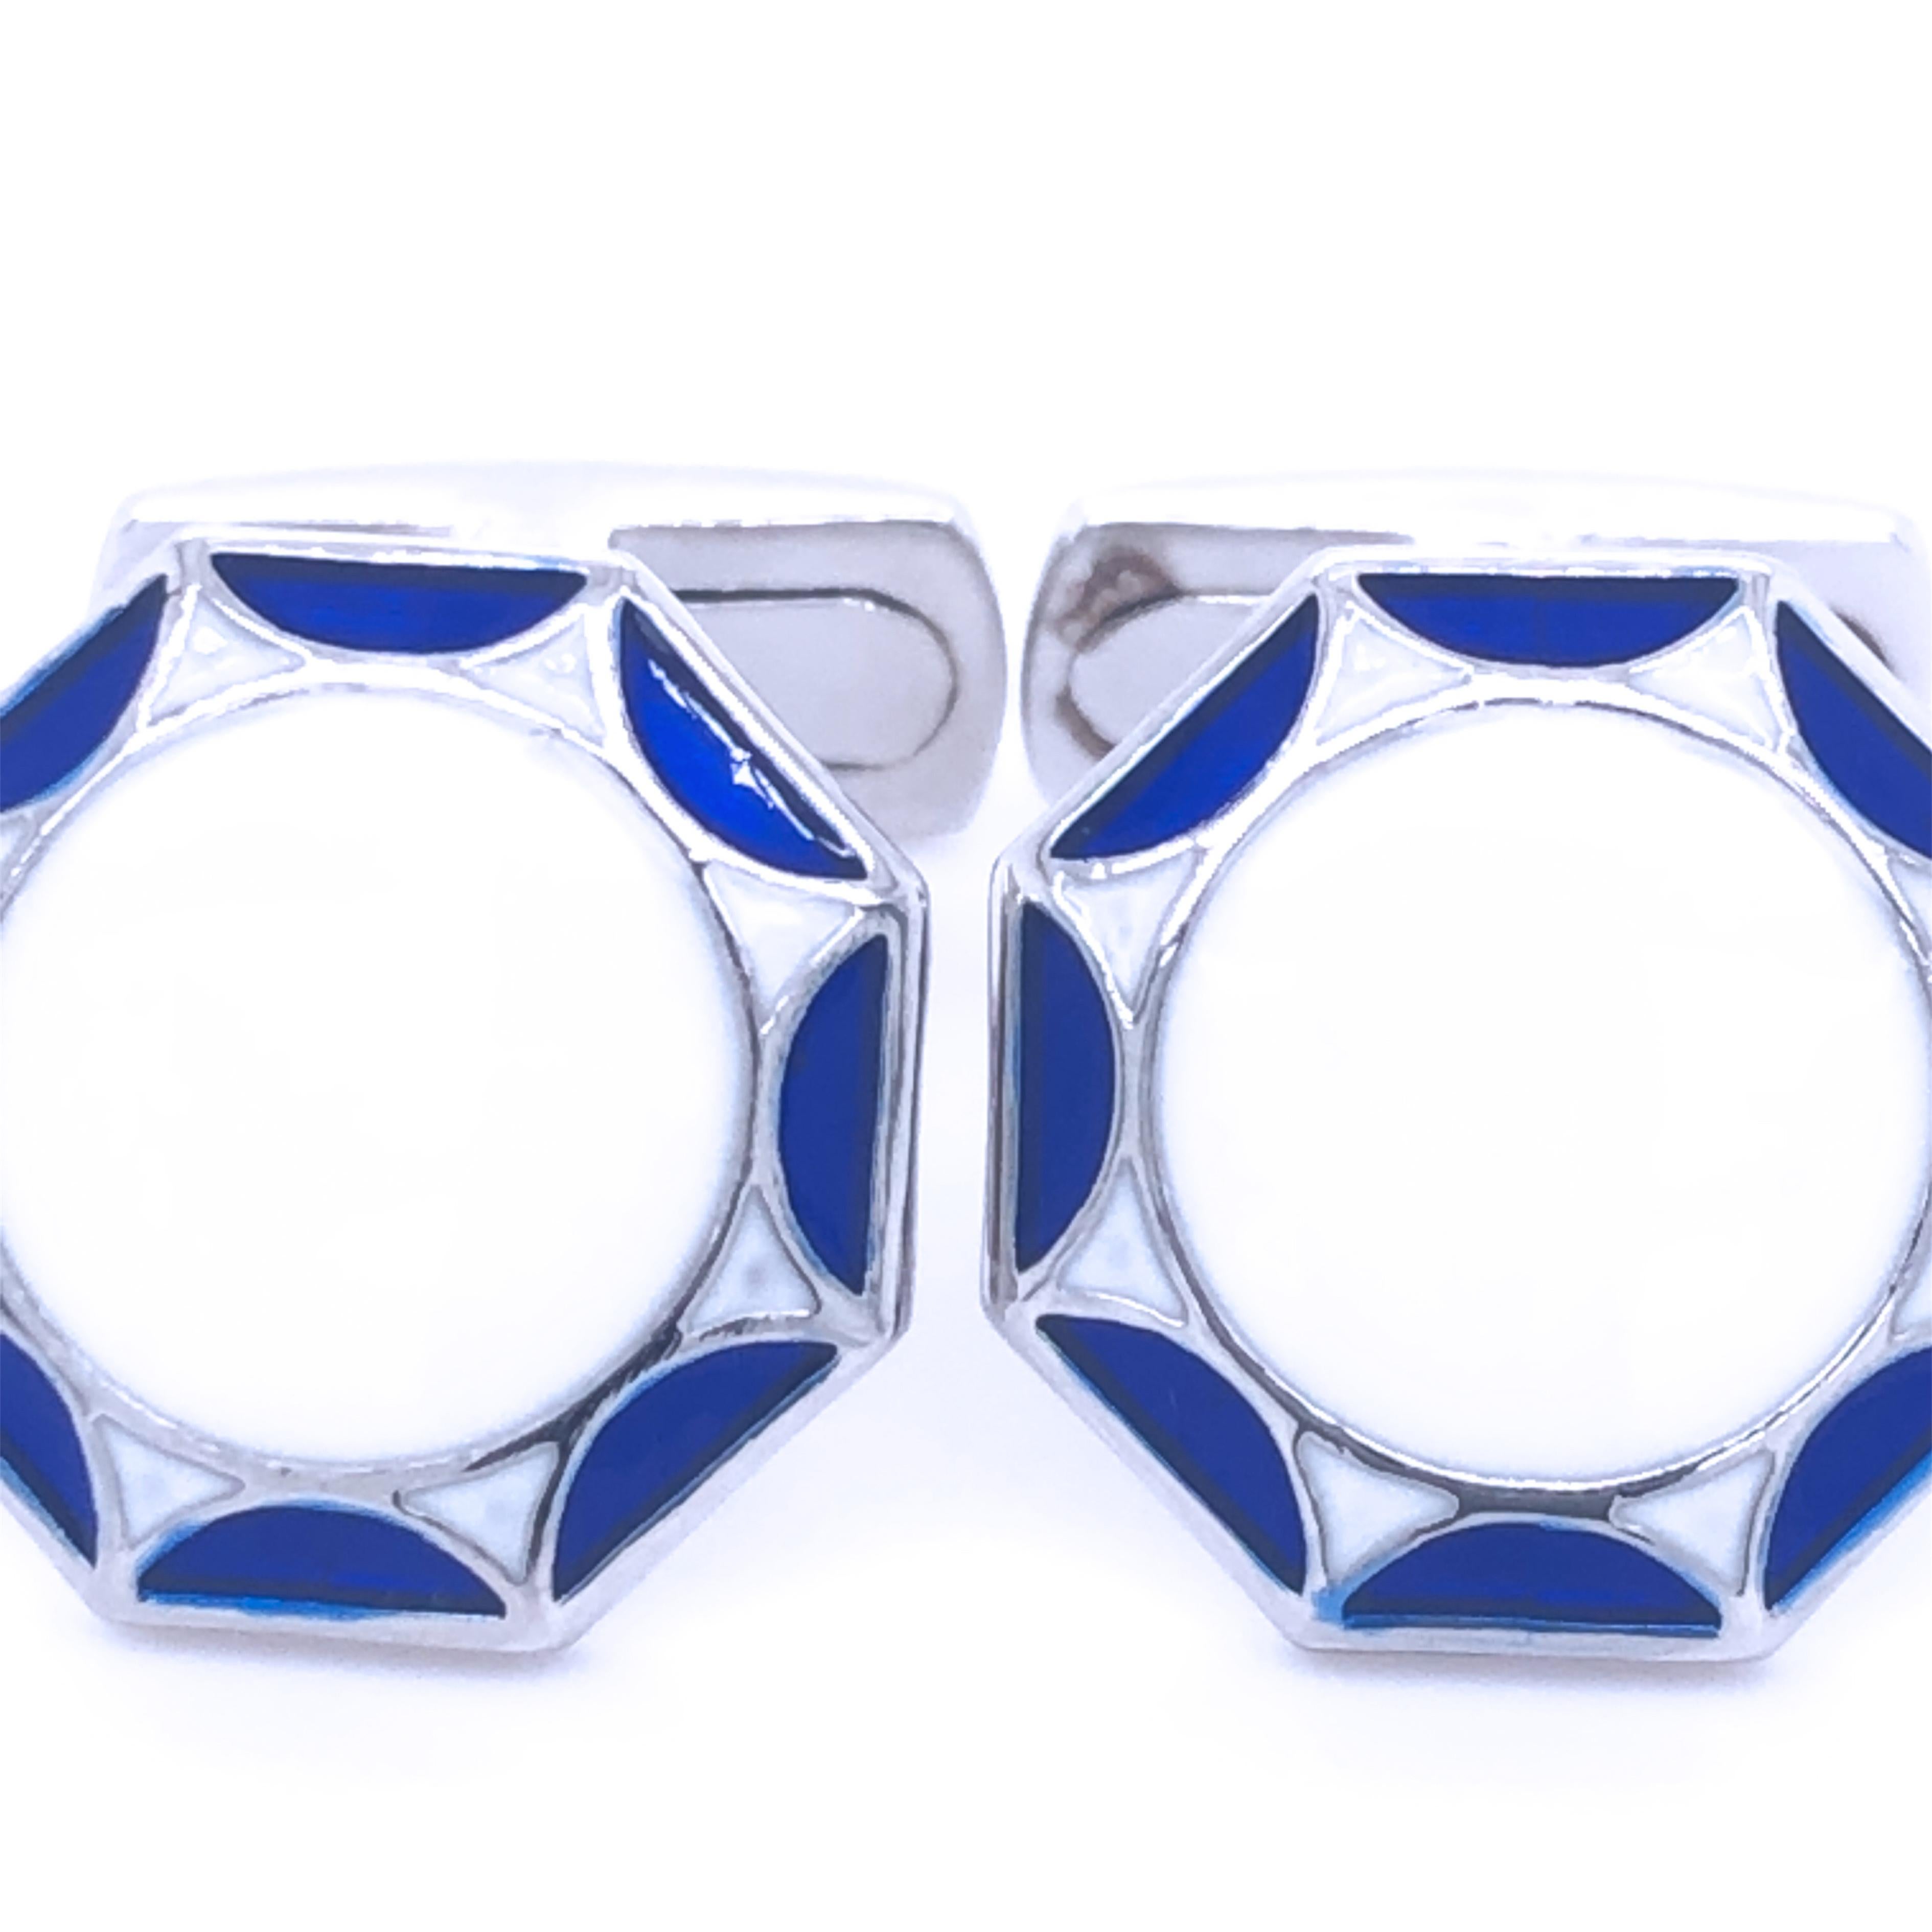 Chic yet Timeless Octagonal White, Navy Blue Hand Enamelled Sterling Silver Cufflinks, T-bar back.
In our Smart Black Box and Pouch.

Front Diameter about 0.55 inches.